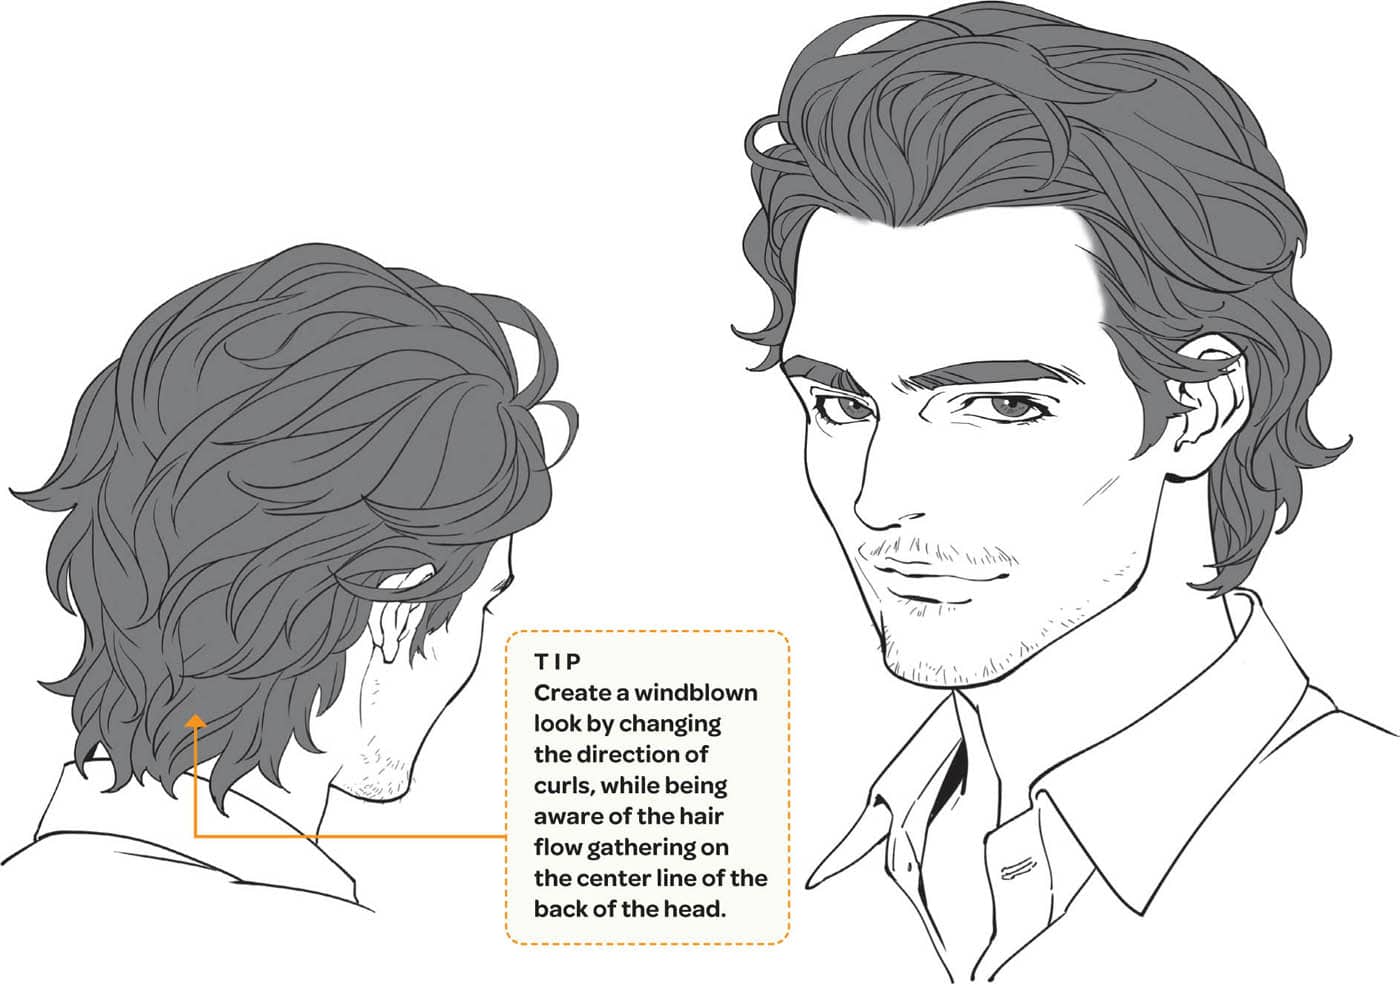 TIP Create a windblown look by changing the direction of curls, while being aware of the hair flow gathering on the center line of the back of the head.